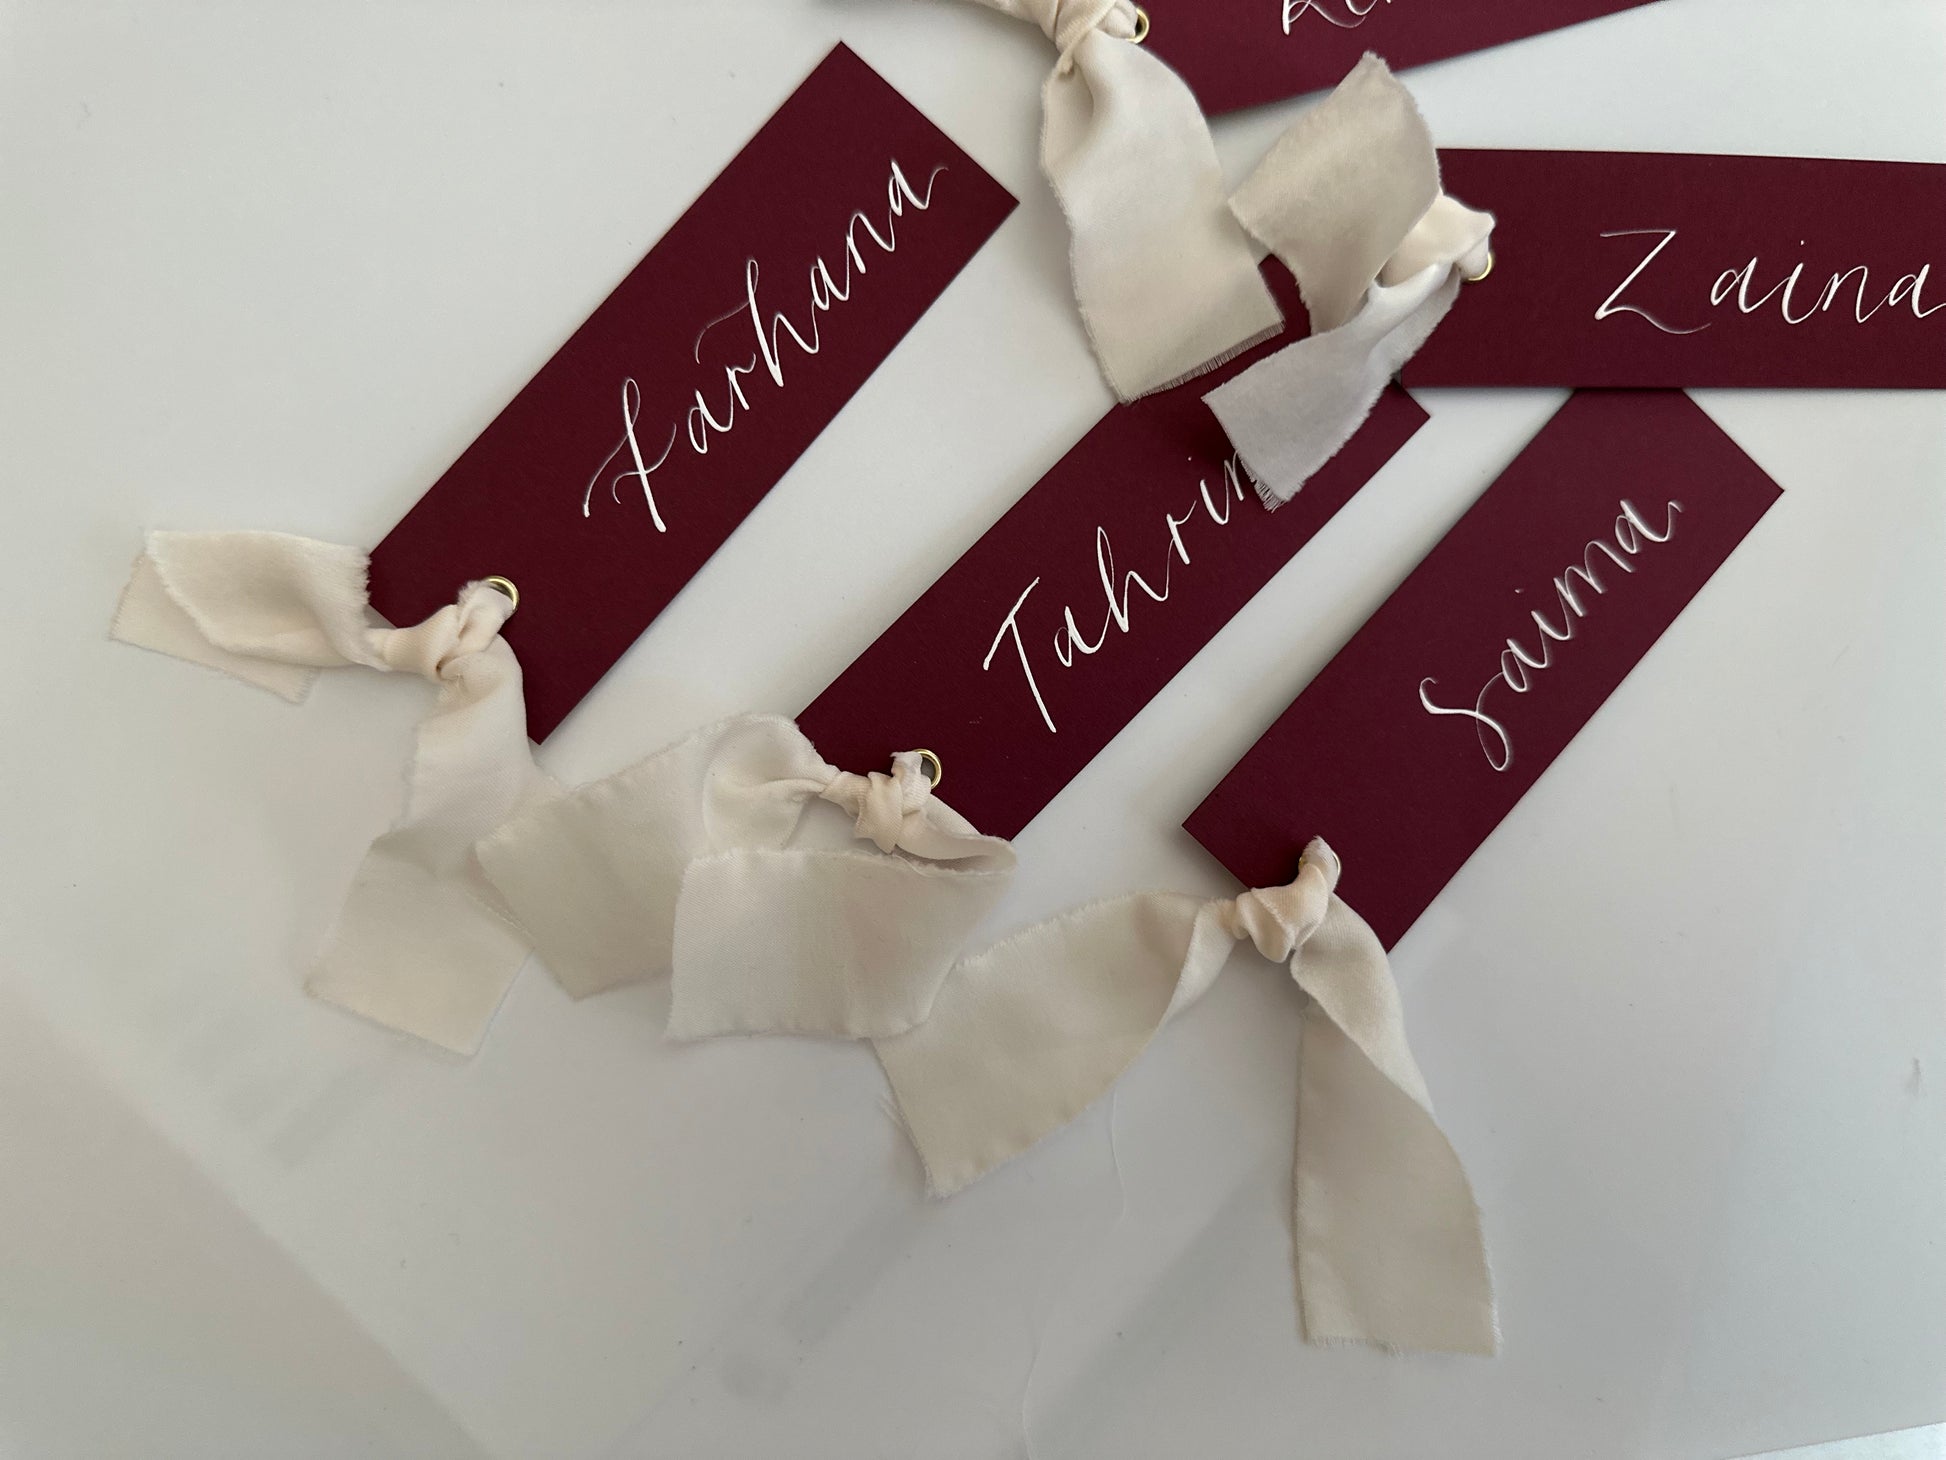 Burgundy Wedding place cards, Table name cards, Wedding name cards, calligraphy place cards, ribbon place cards